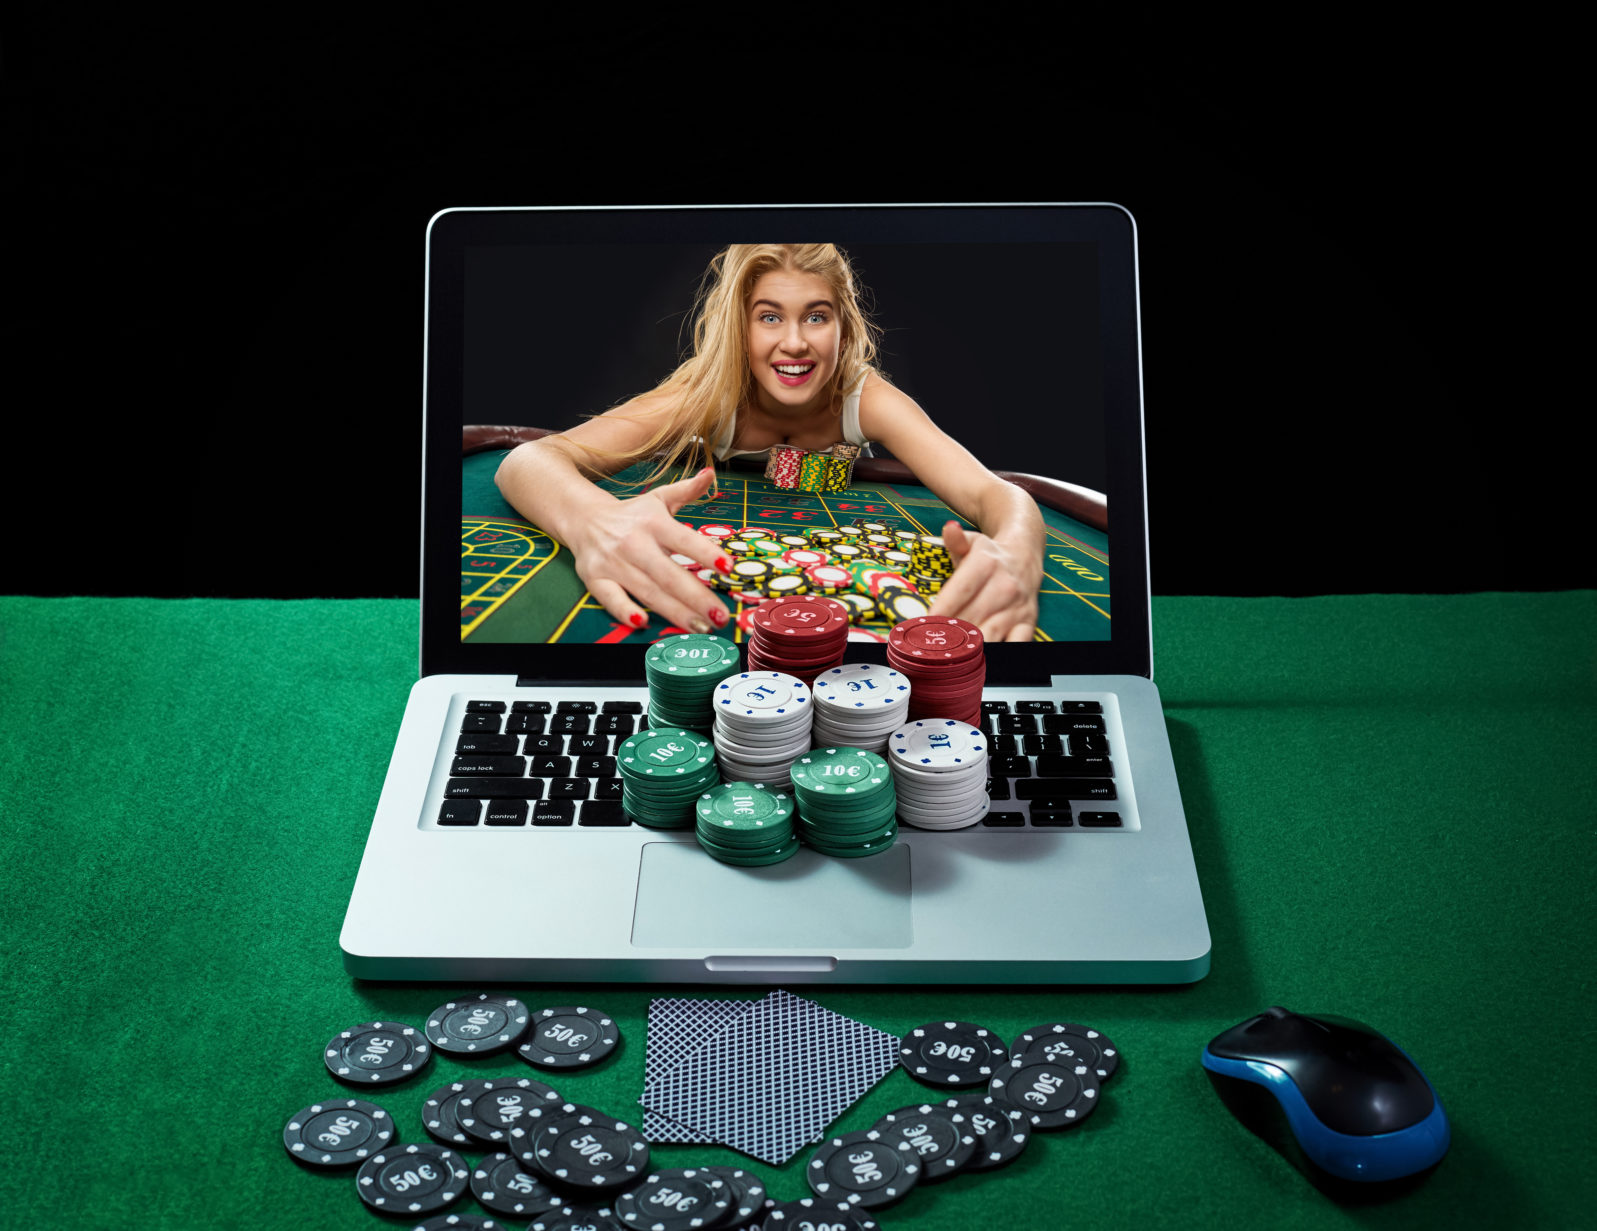 Green table with casino chips and cards on notebook